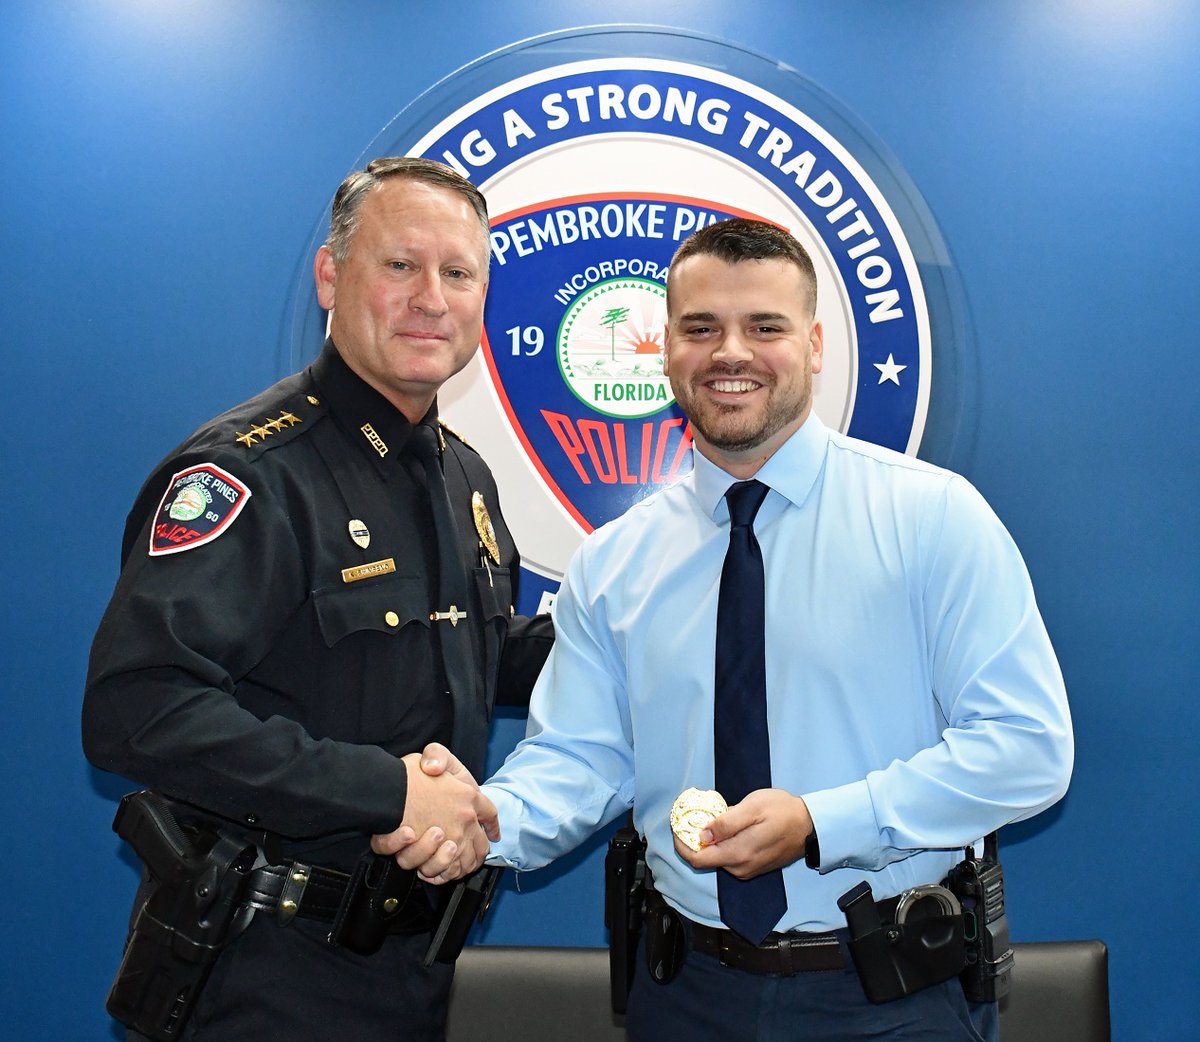 Congratulations to Officer Kevin Rodriguez, who was presented with his Detective badge today by Chief Kipp Shimpeno. Detective Rodriguez will be joining our Economic Crimes Unit that primarily investigates fraud cases - many of which impact our vulnerable senior citizens.